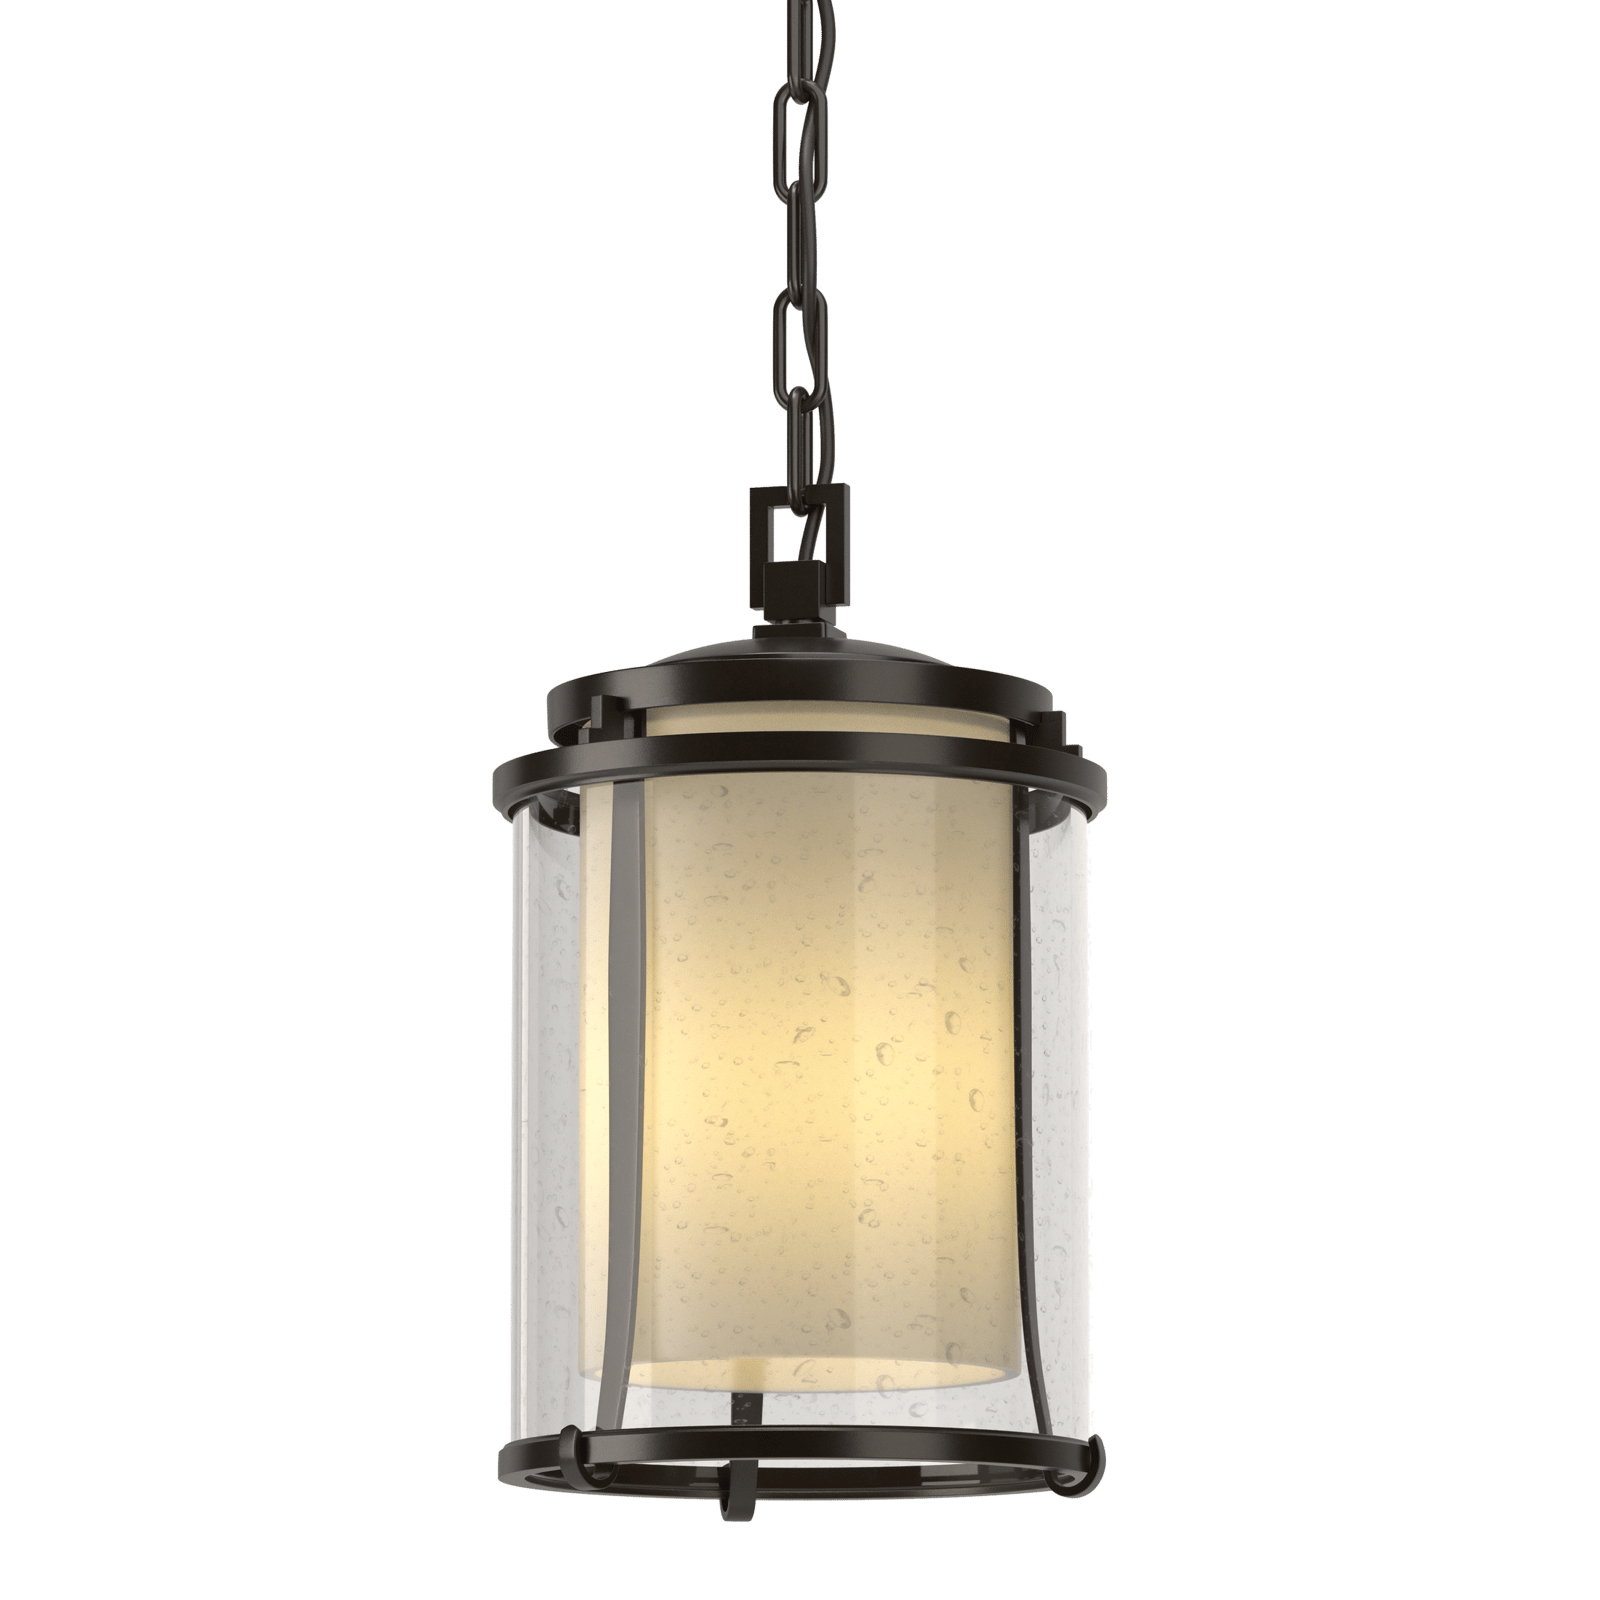 Hubbardton Forge Meridian Outdoor Ceiling Fixture Outdoor l Wall Hubbardton Forge Coastal Oil Rubbed Bronze Seeded Glass with Opal Diffuser (ZS) 